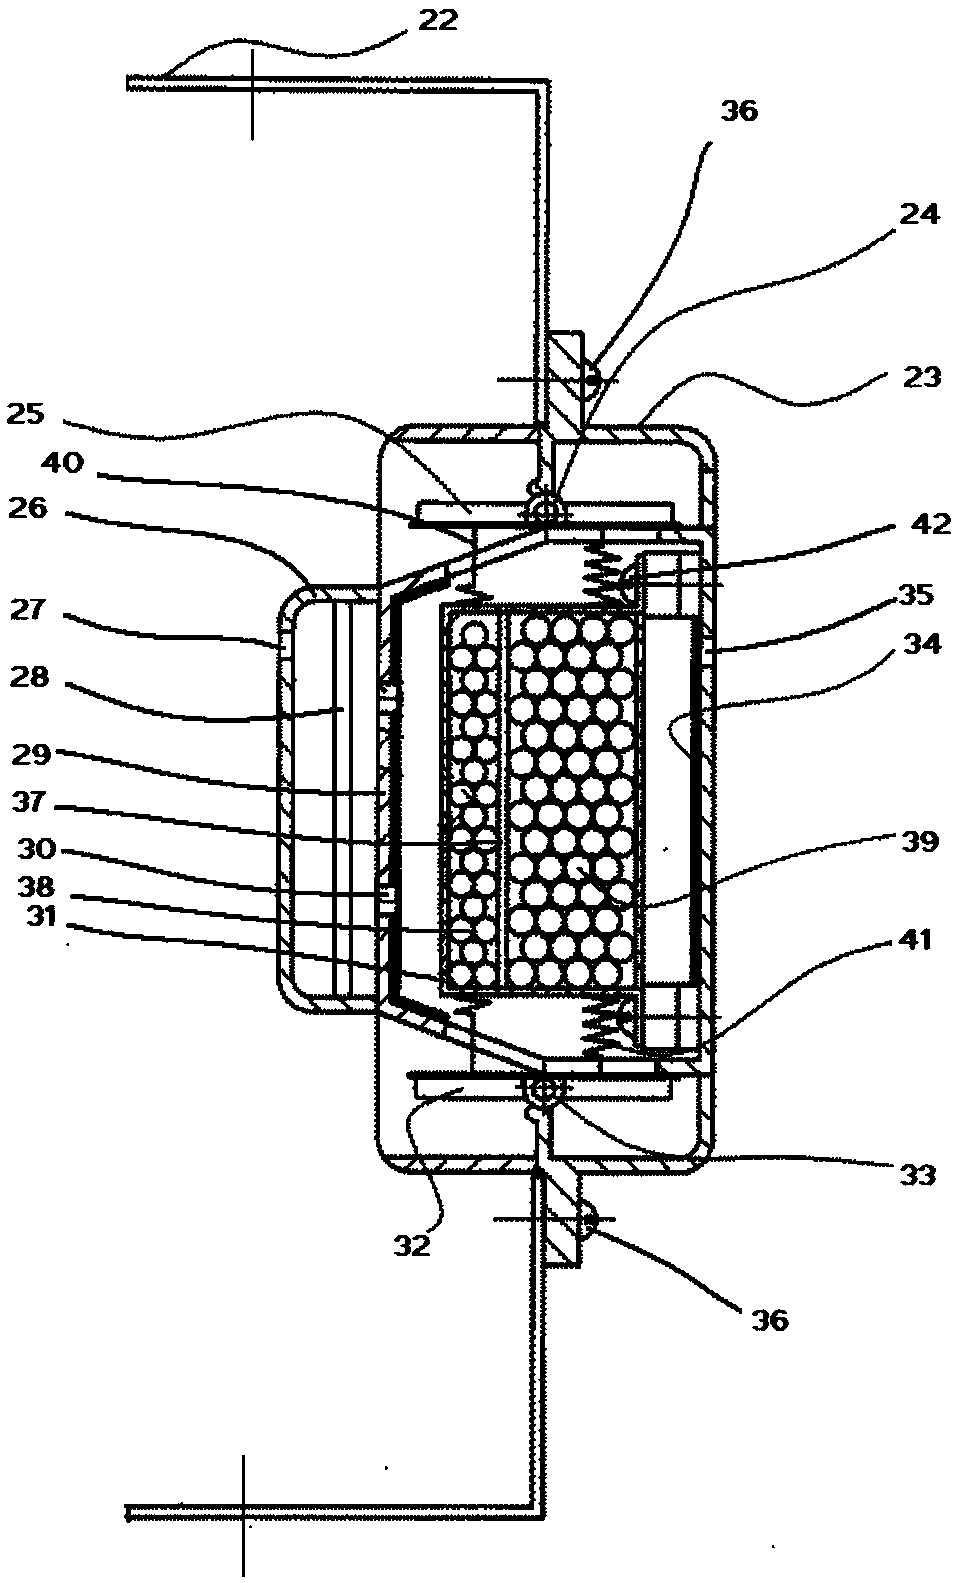 Living livestock transportation container with air inlet and outlet pipeline integration module